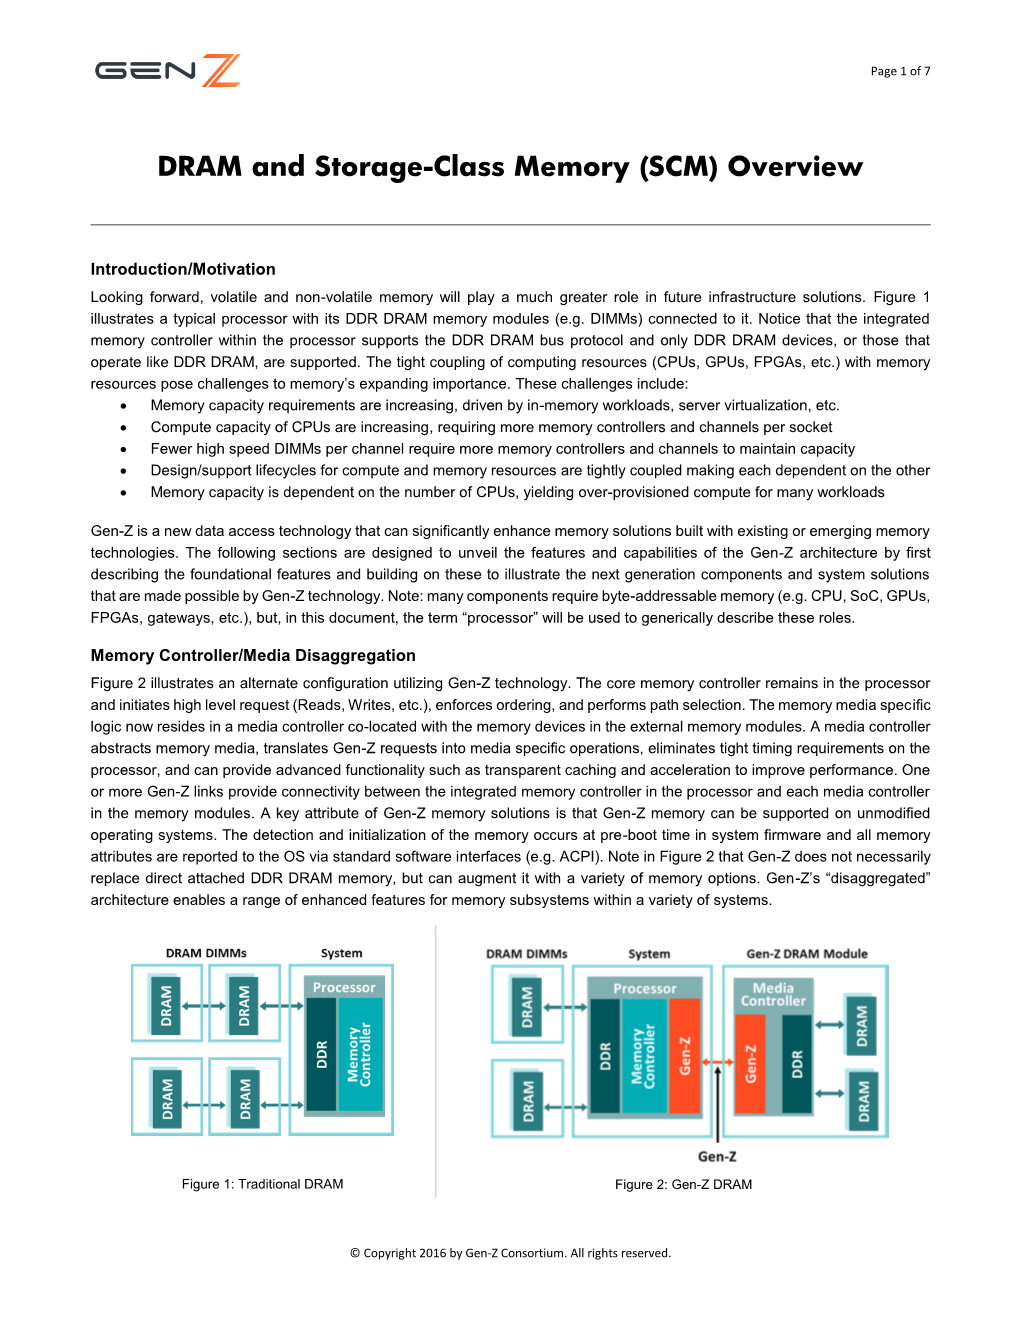 DRAM and Storage-Class Memory (SCM) Overview